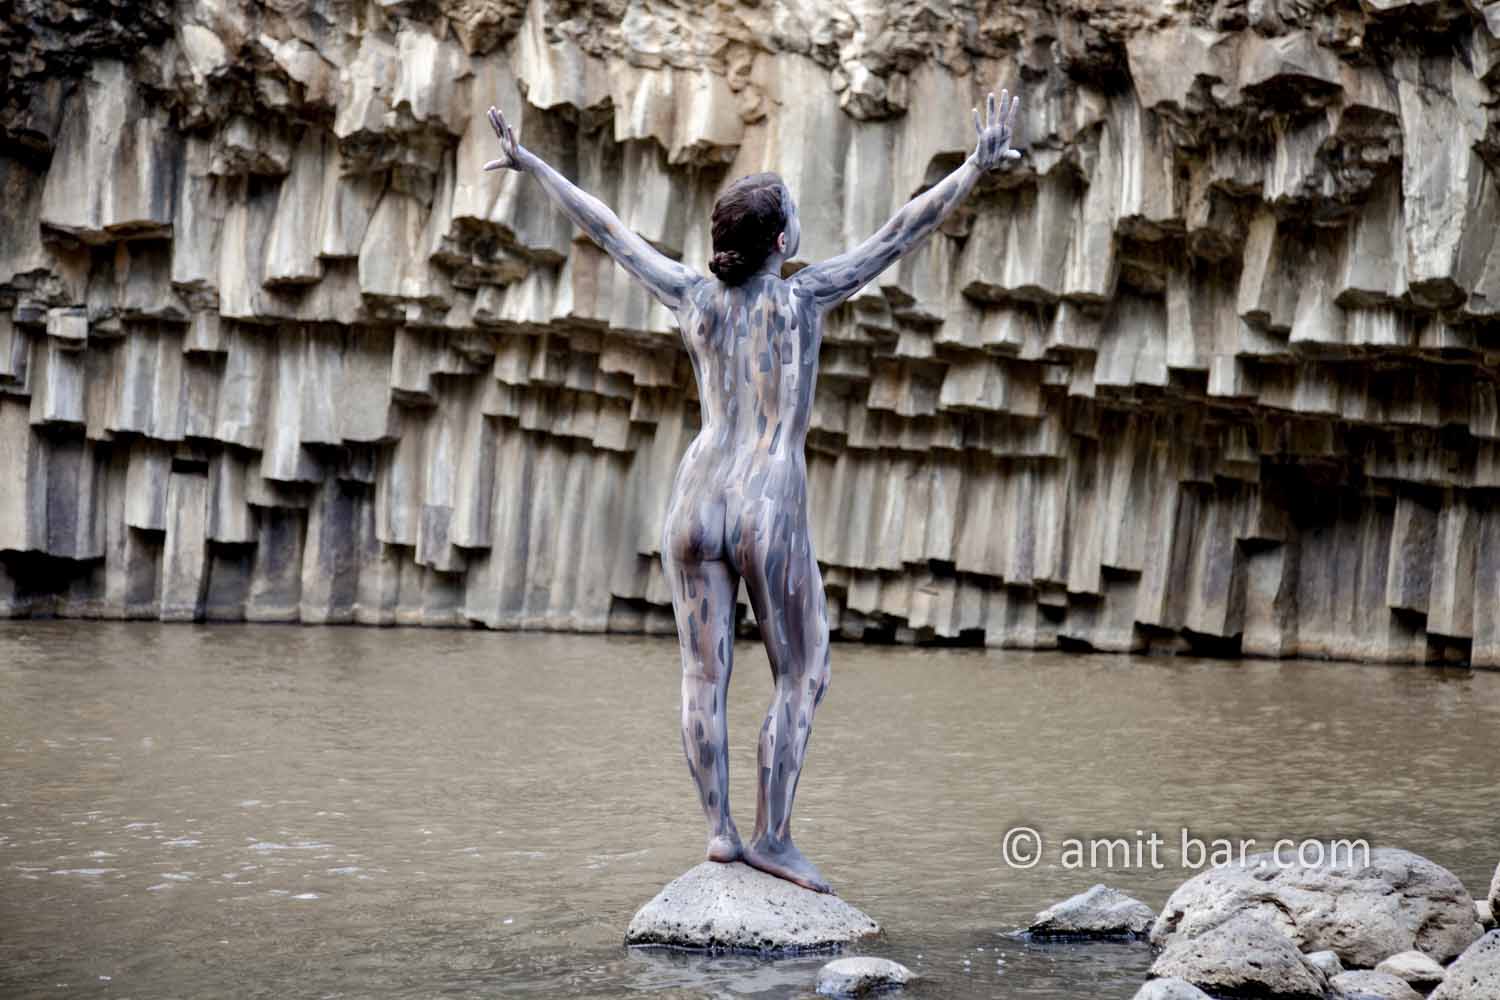 Rocky Girl II: Body painted model at the Golan Heights, Israel